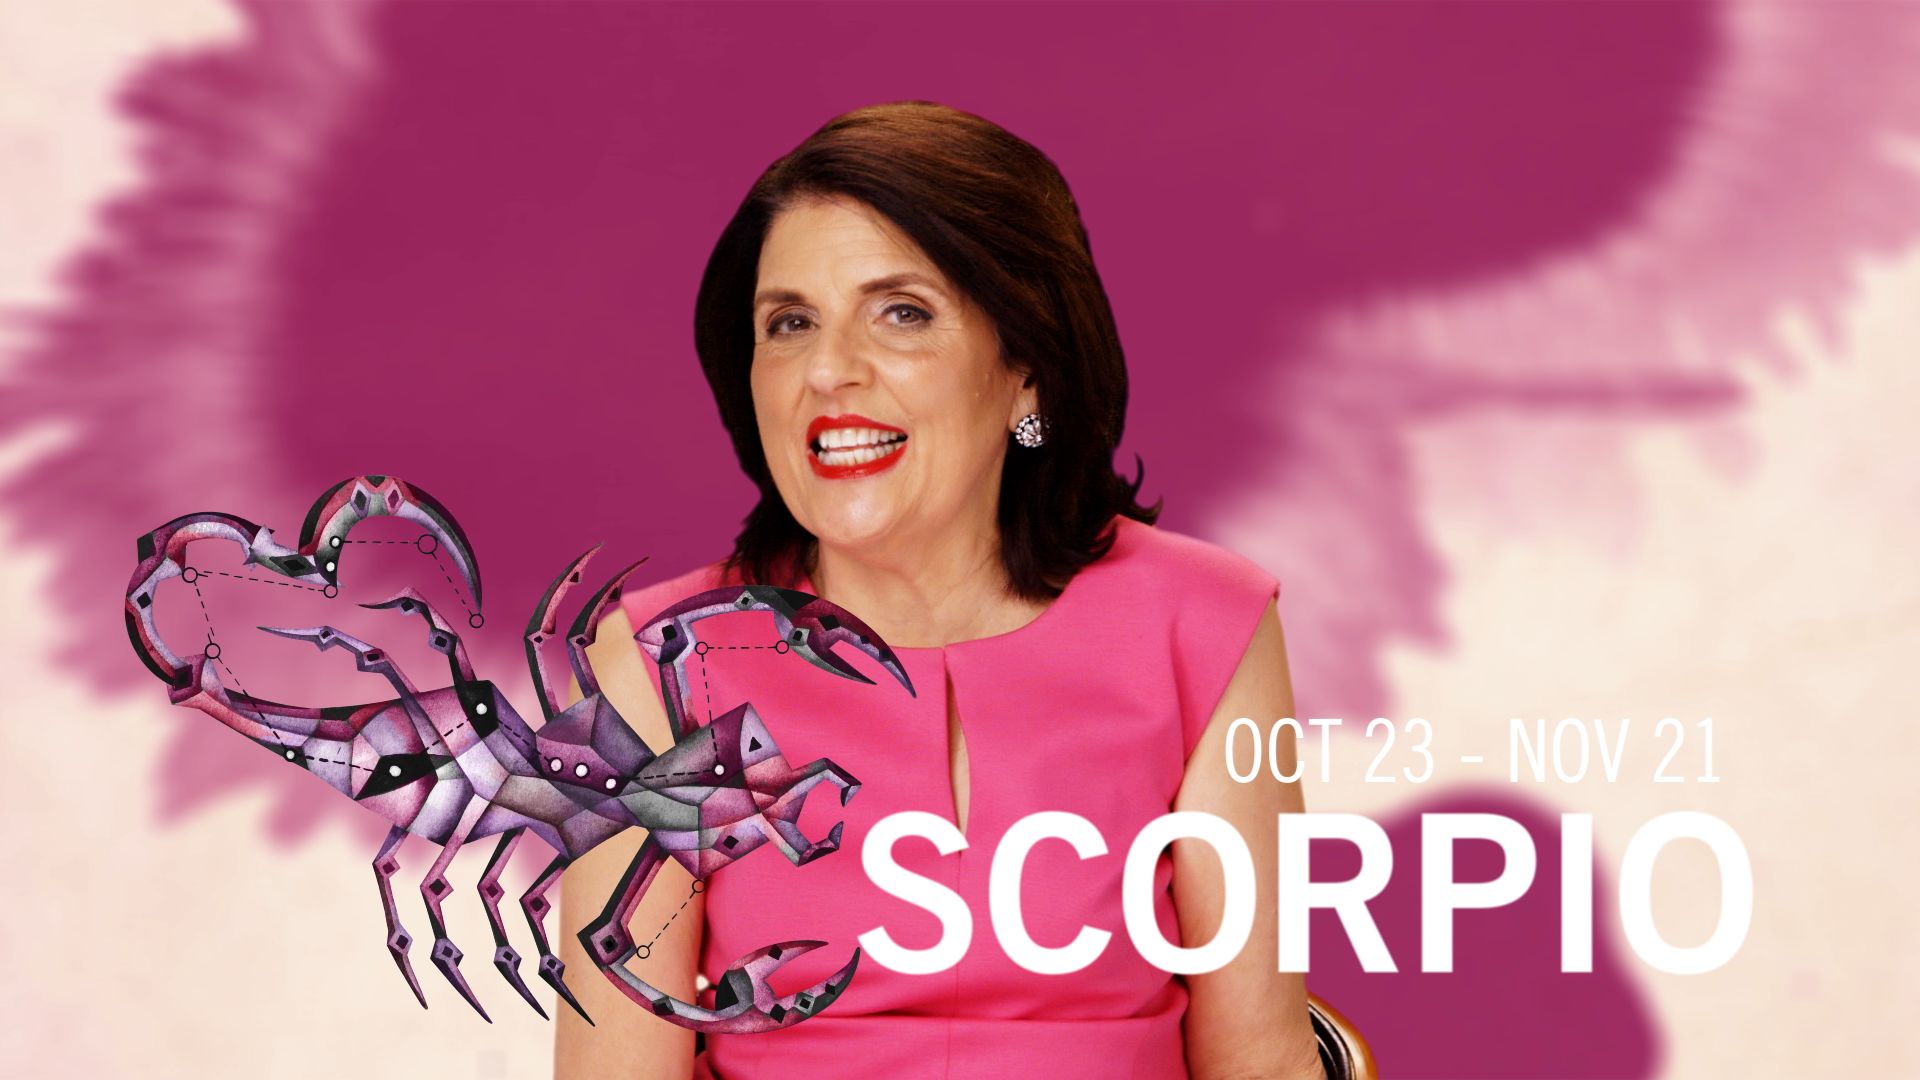 Watch Glamourscopes with Susan Miller Scorpio Horoscope 2015 Most